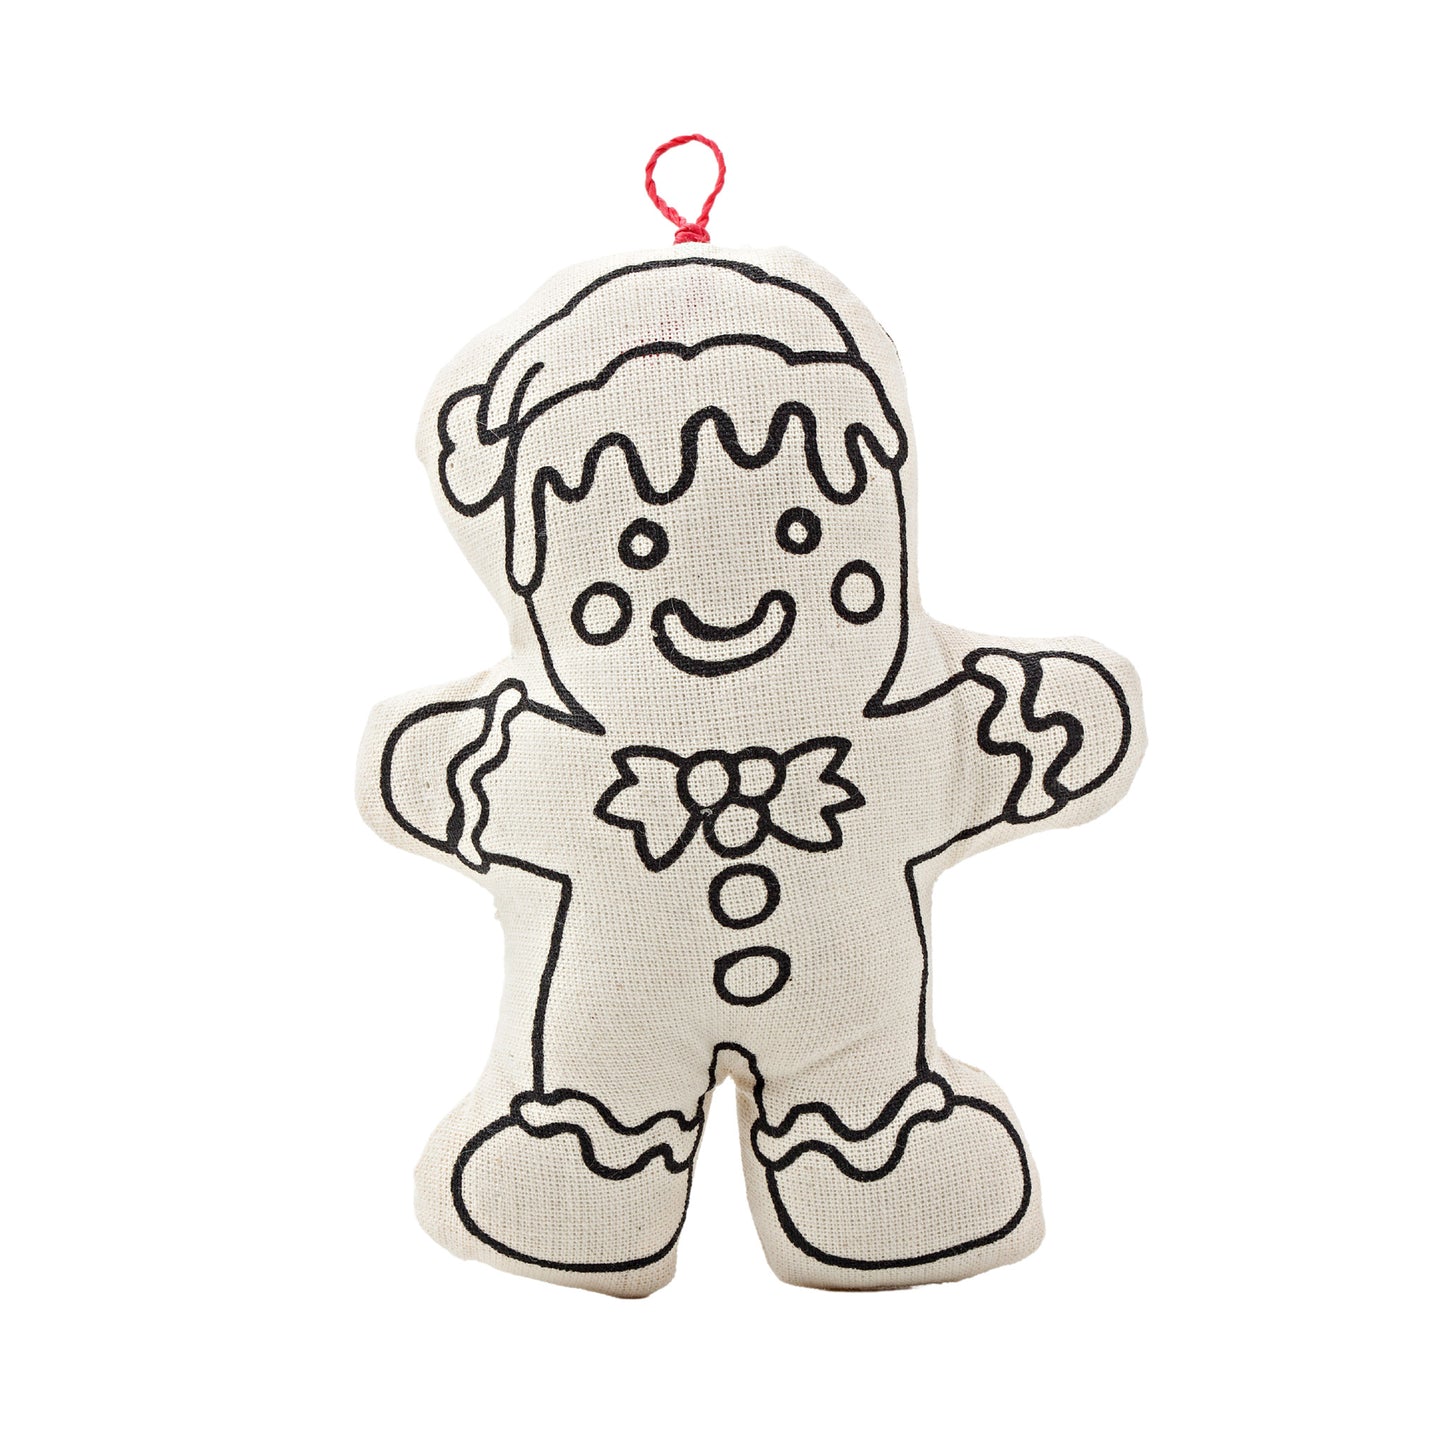 Ornaments for Coloring - Gingerbread Man and Snowman